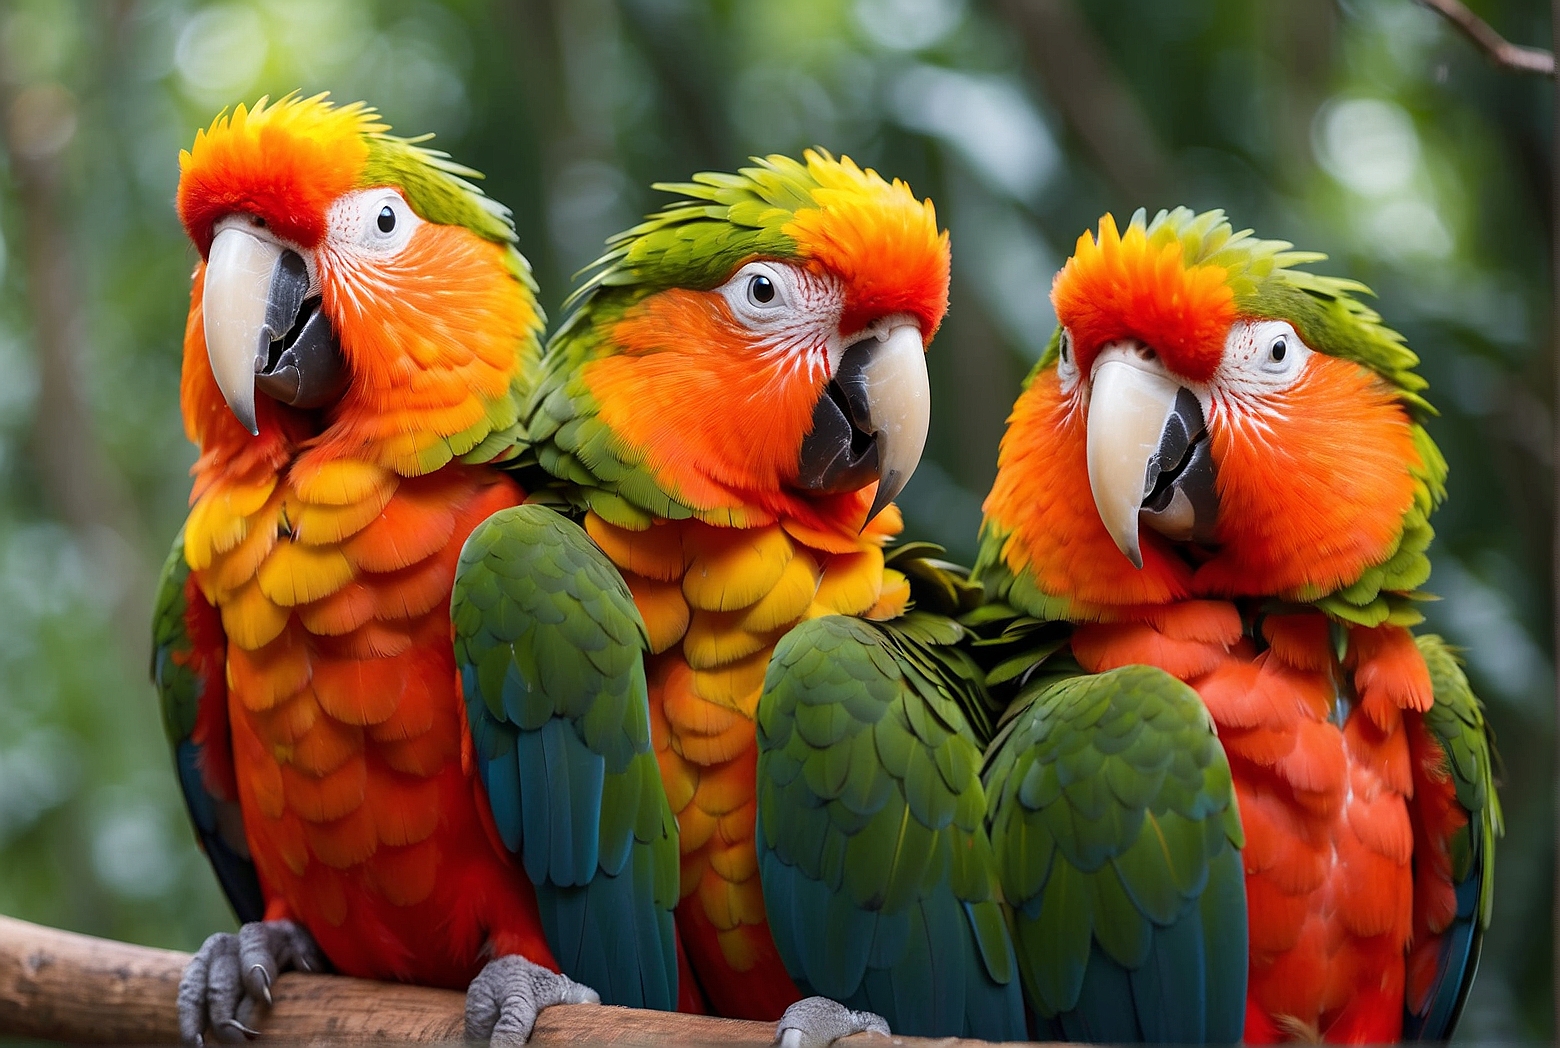 Are Parrots Endangered?